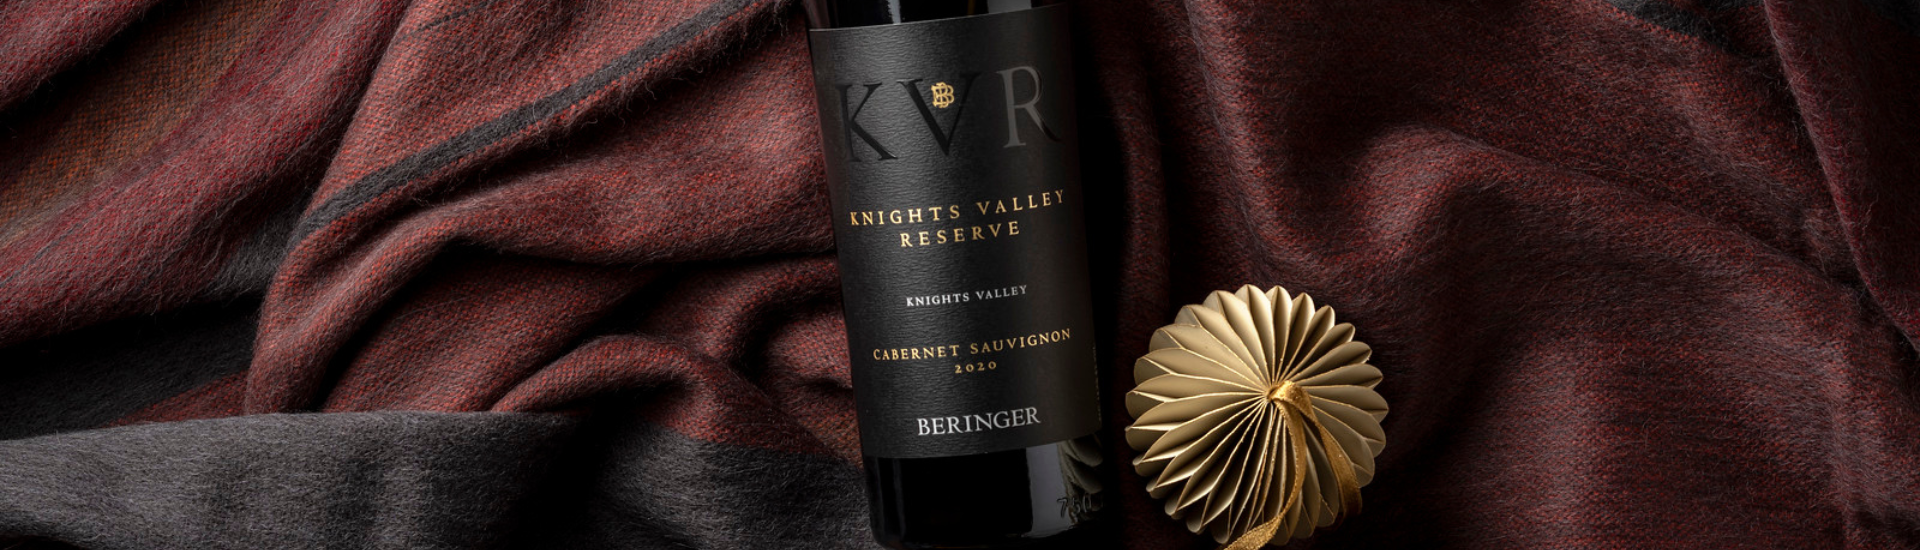 Knights Valley Reserve Cabernet